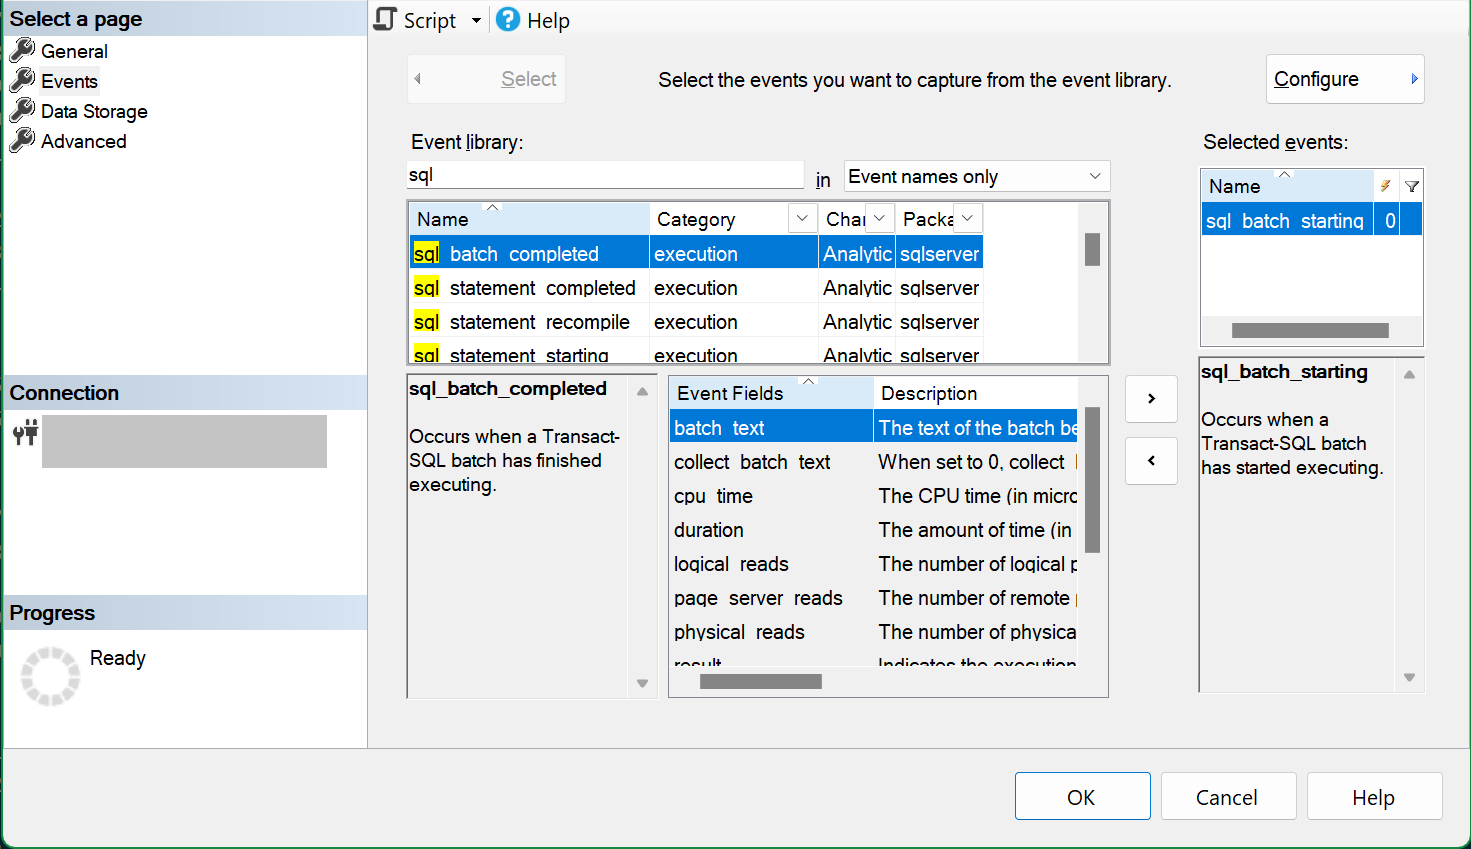 Screenshot of the New Session SSMS dialog showing the event selection page with the sql_batch_starting event selected.